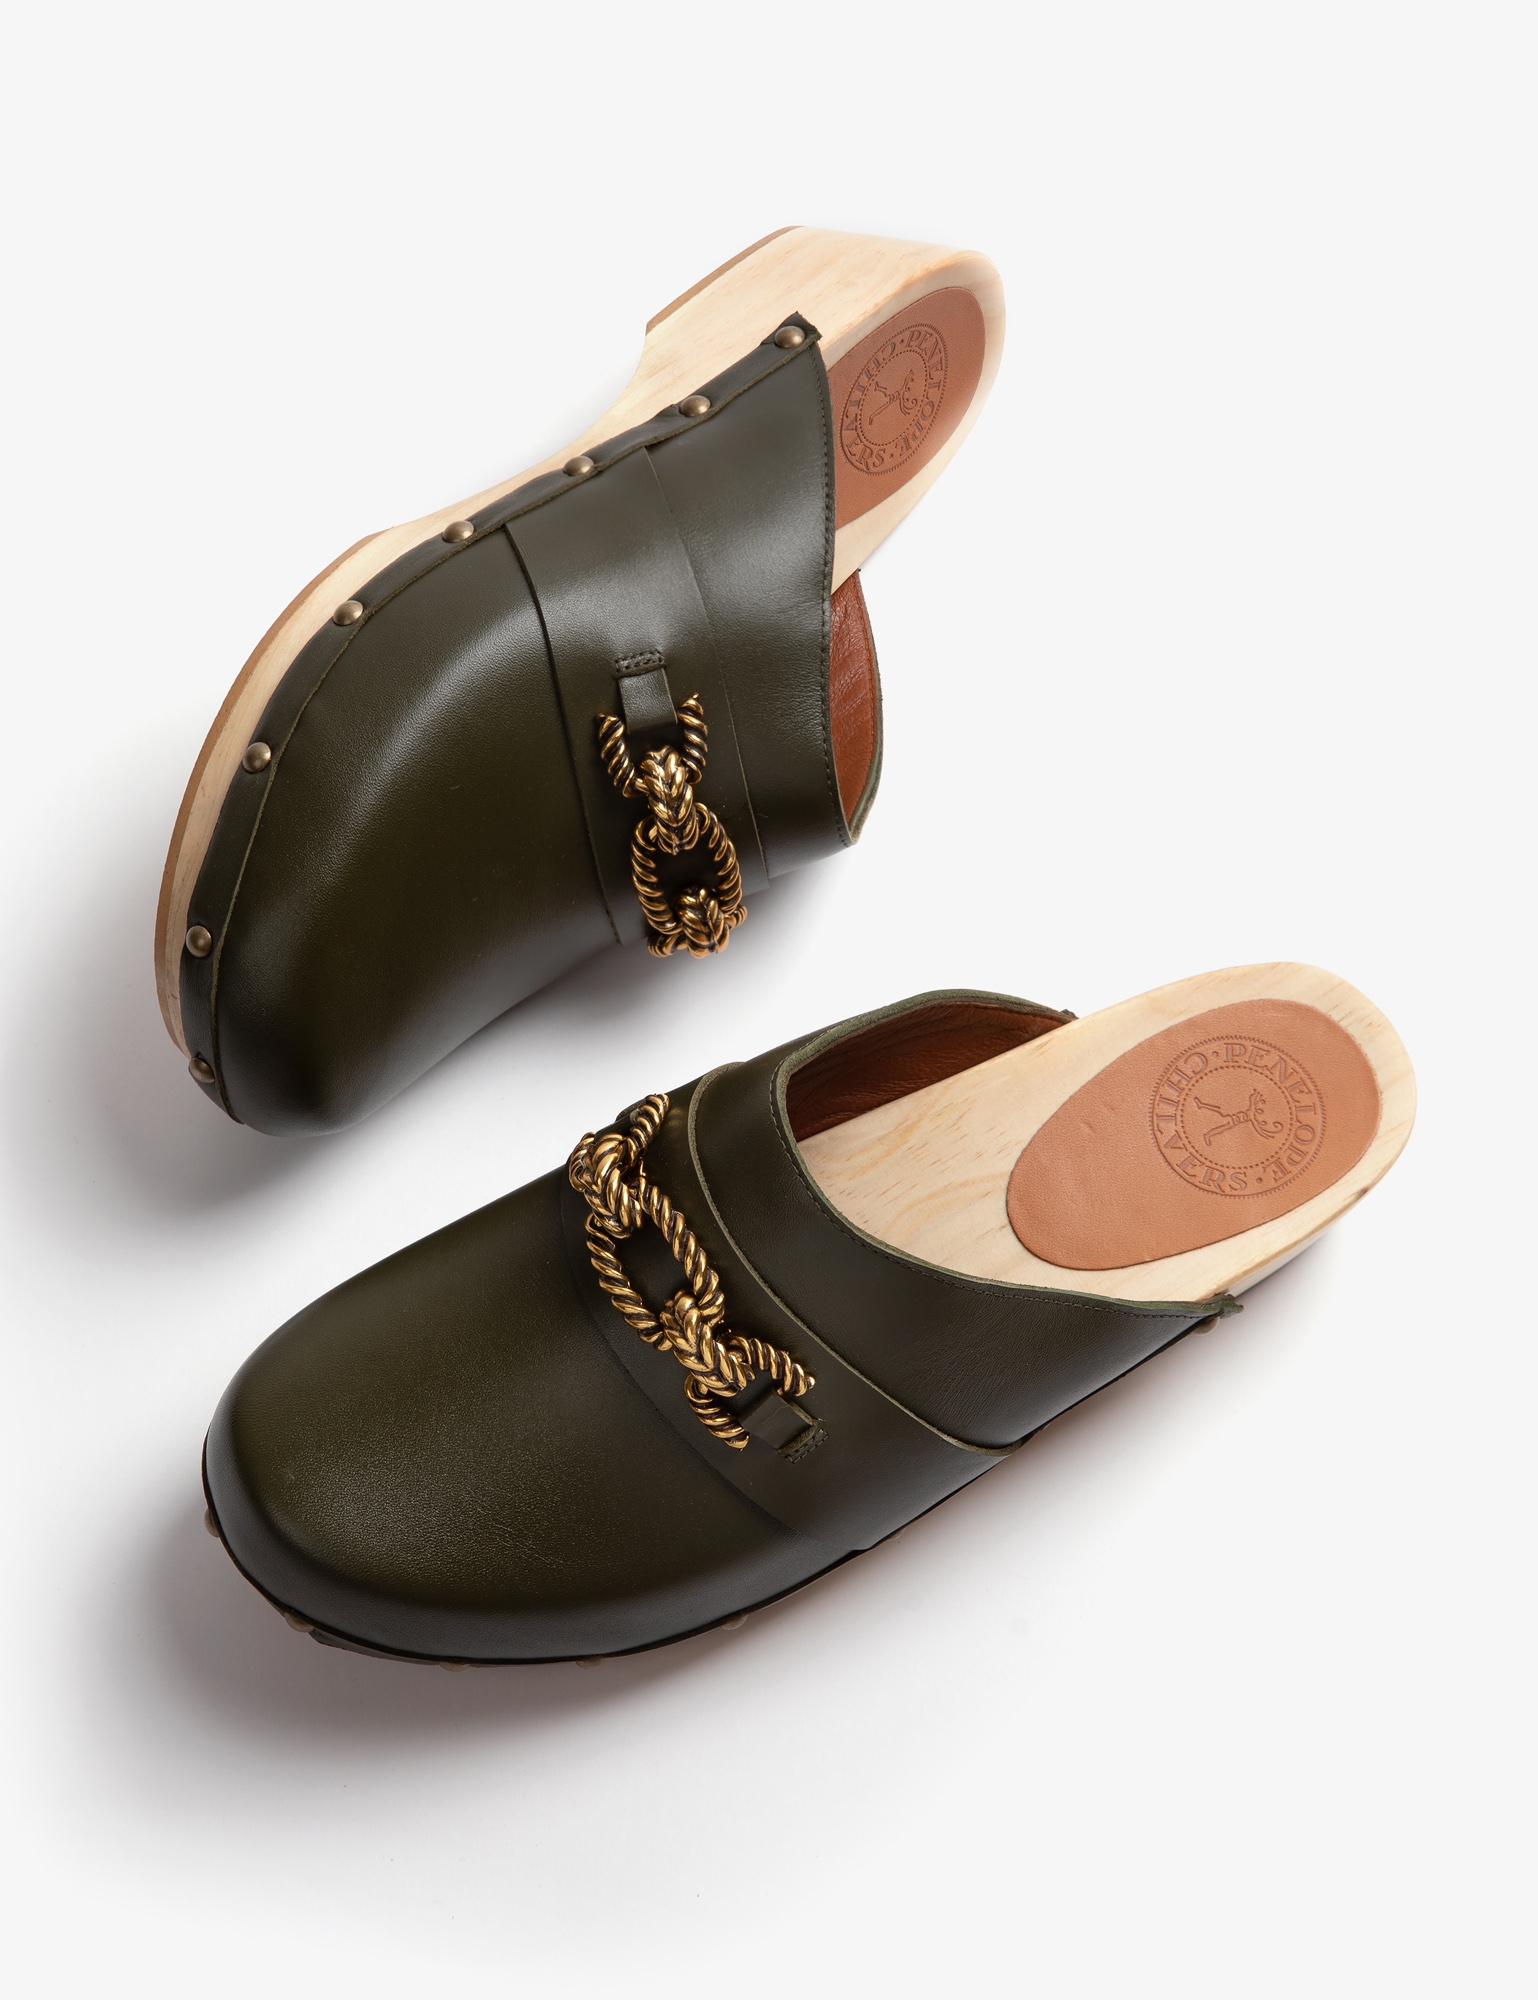 Low Barley Twist Leather Clog| Women's Clogs |Penelope Chilvers